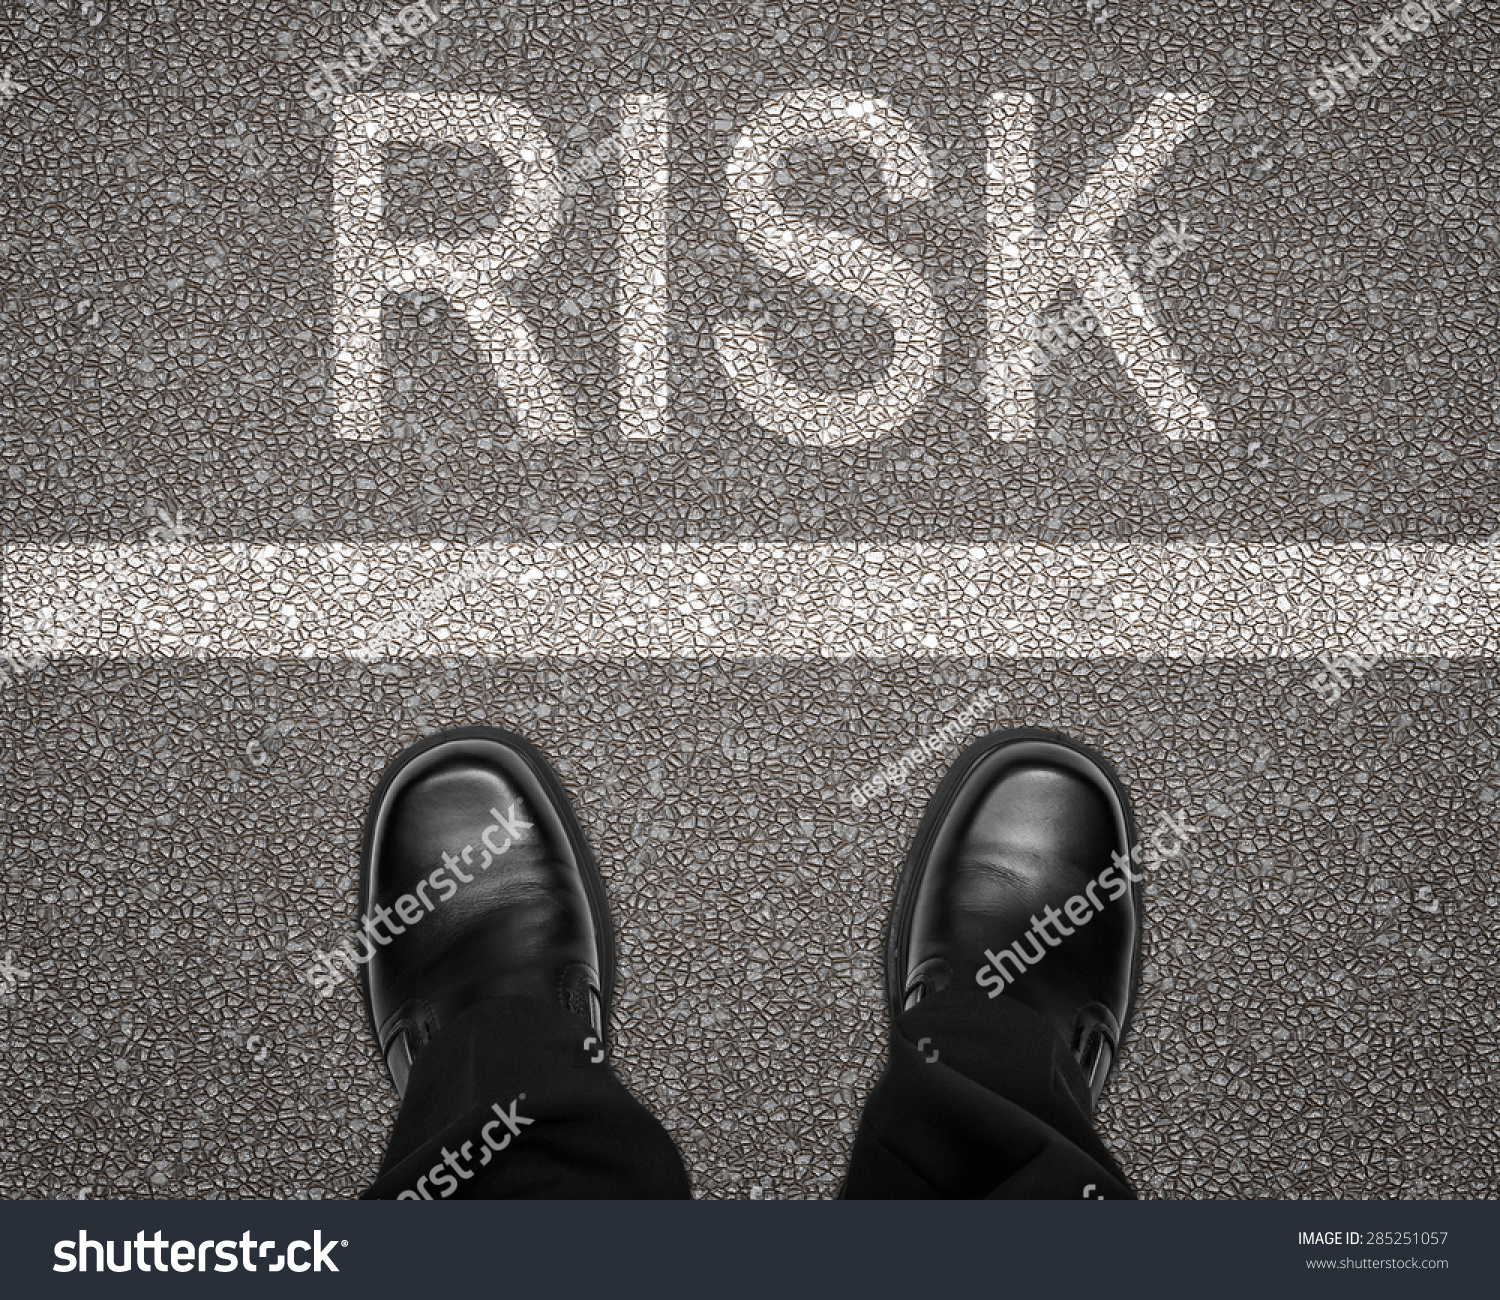 Take a risk concept with feet on road behind white line #285251057